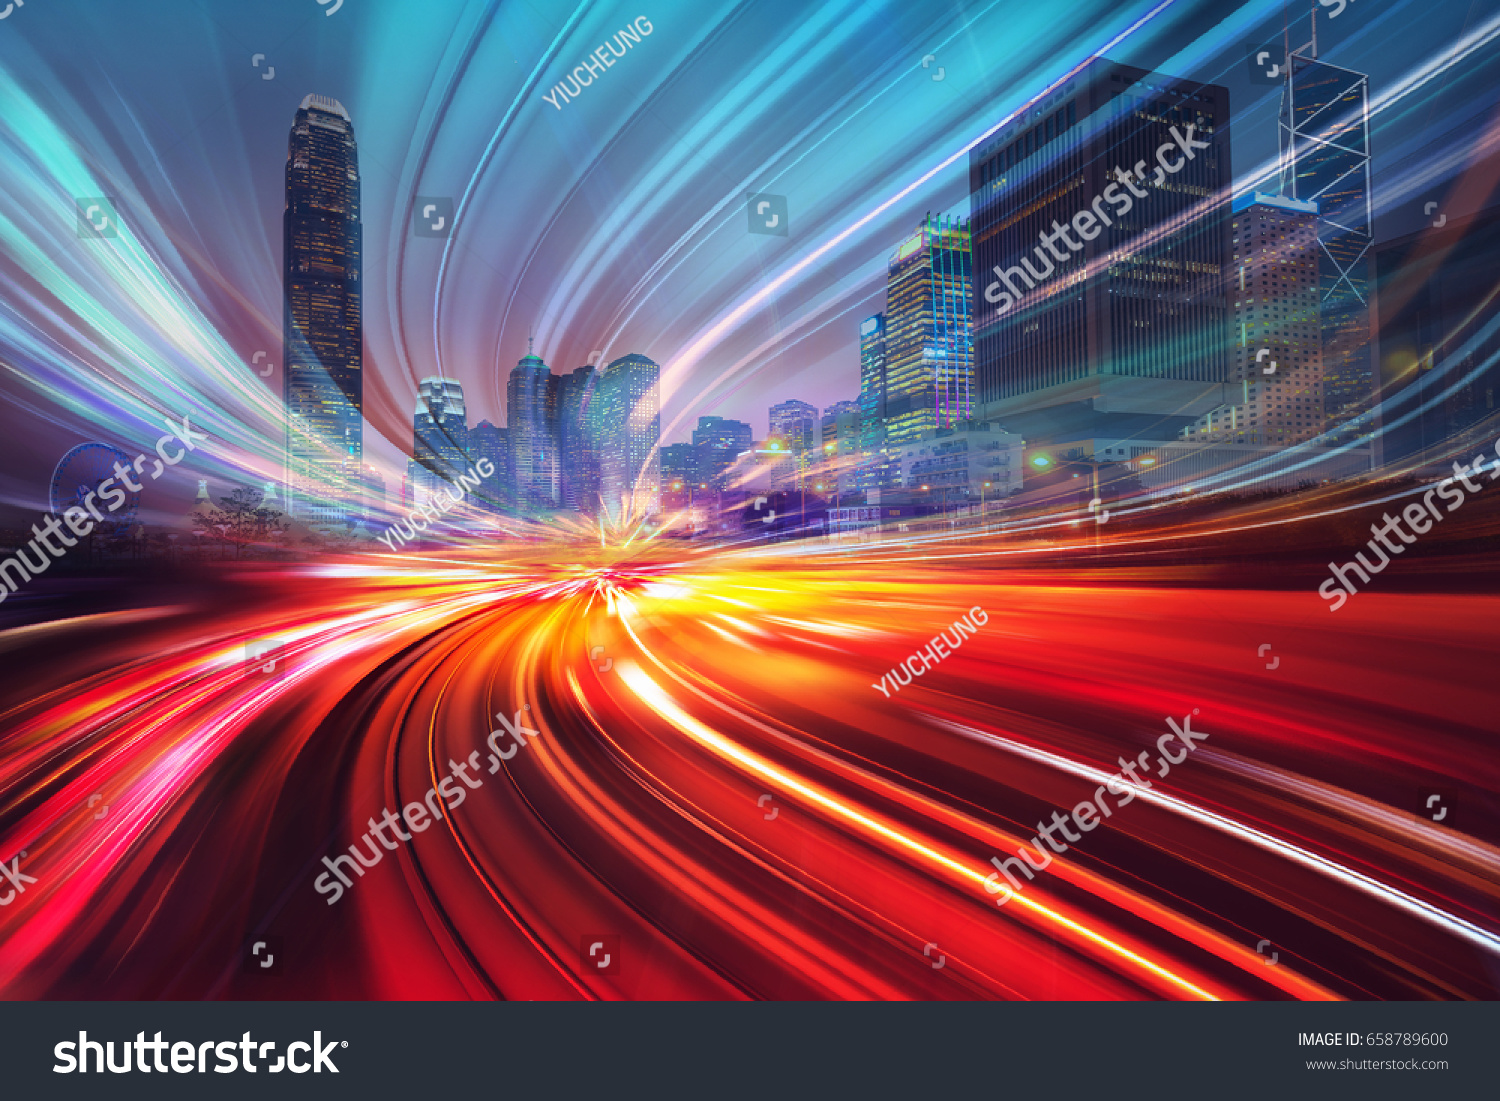 Motion speed effect with City Night Illustration #658789600